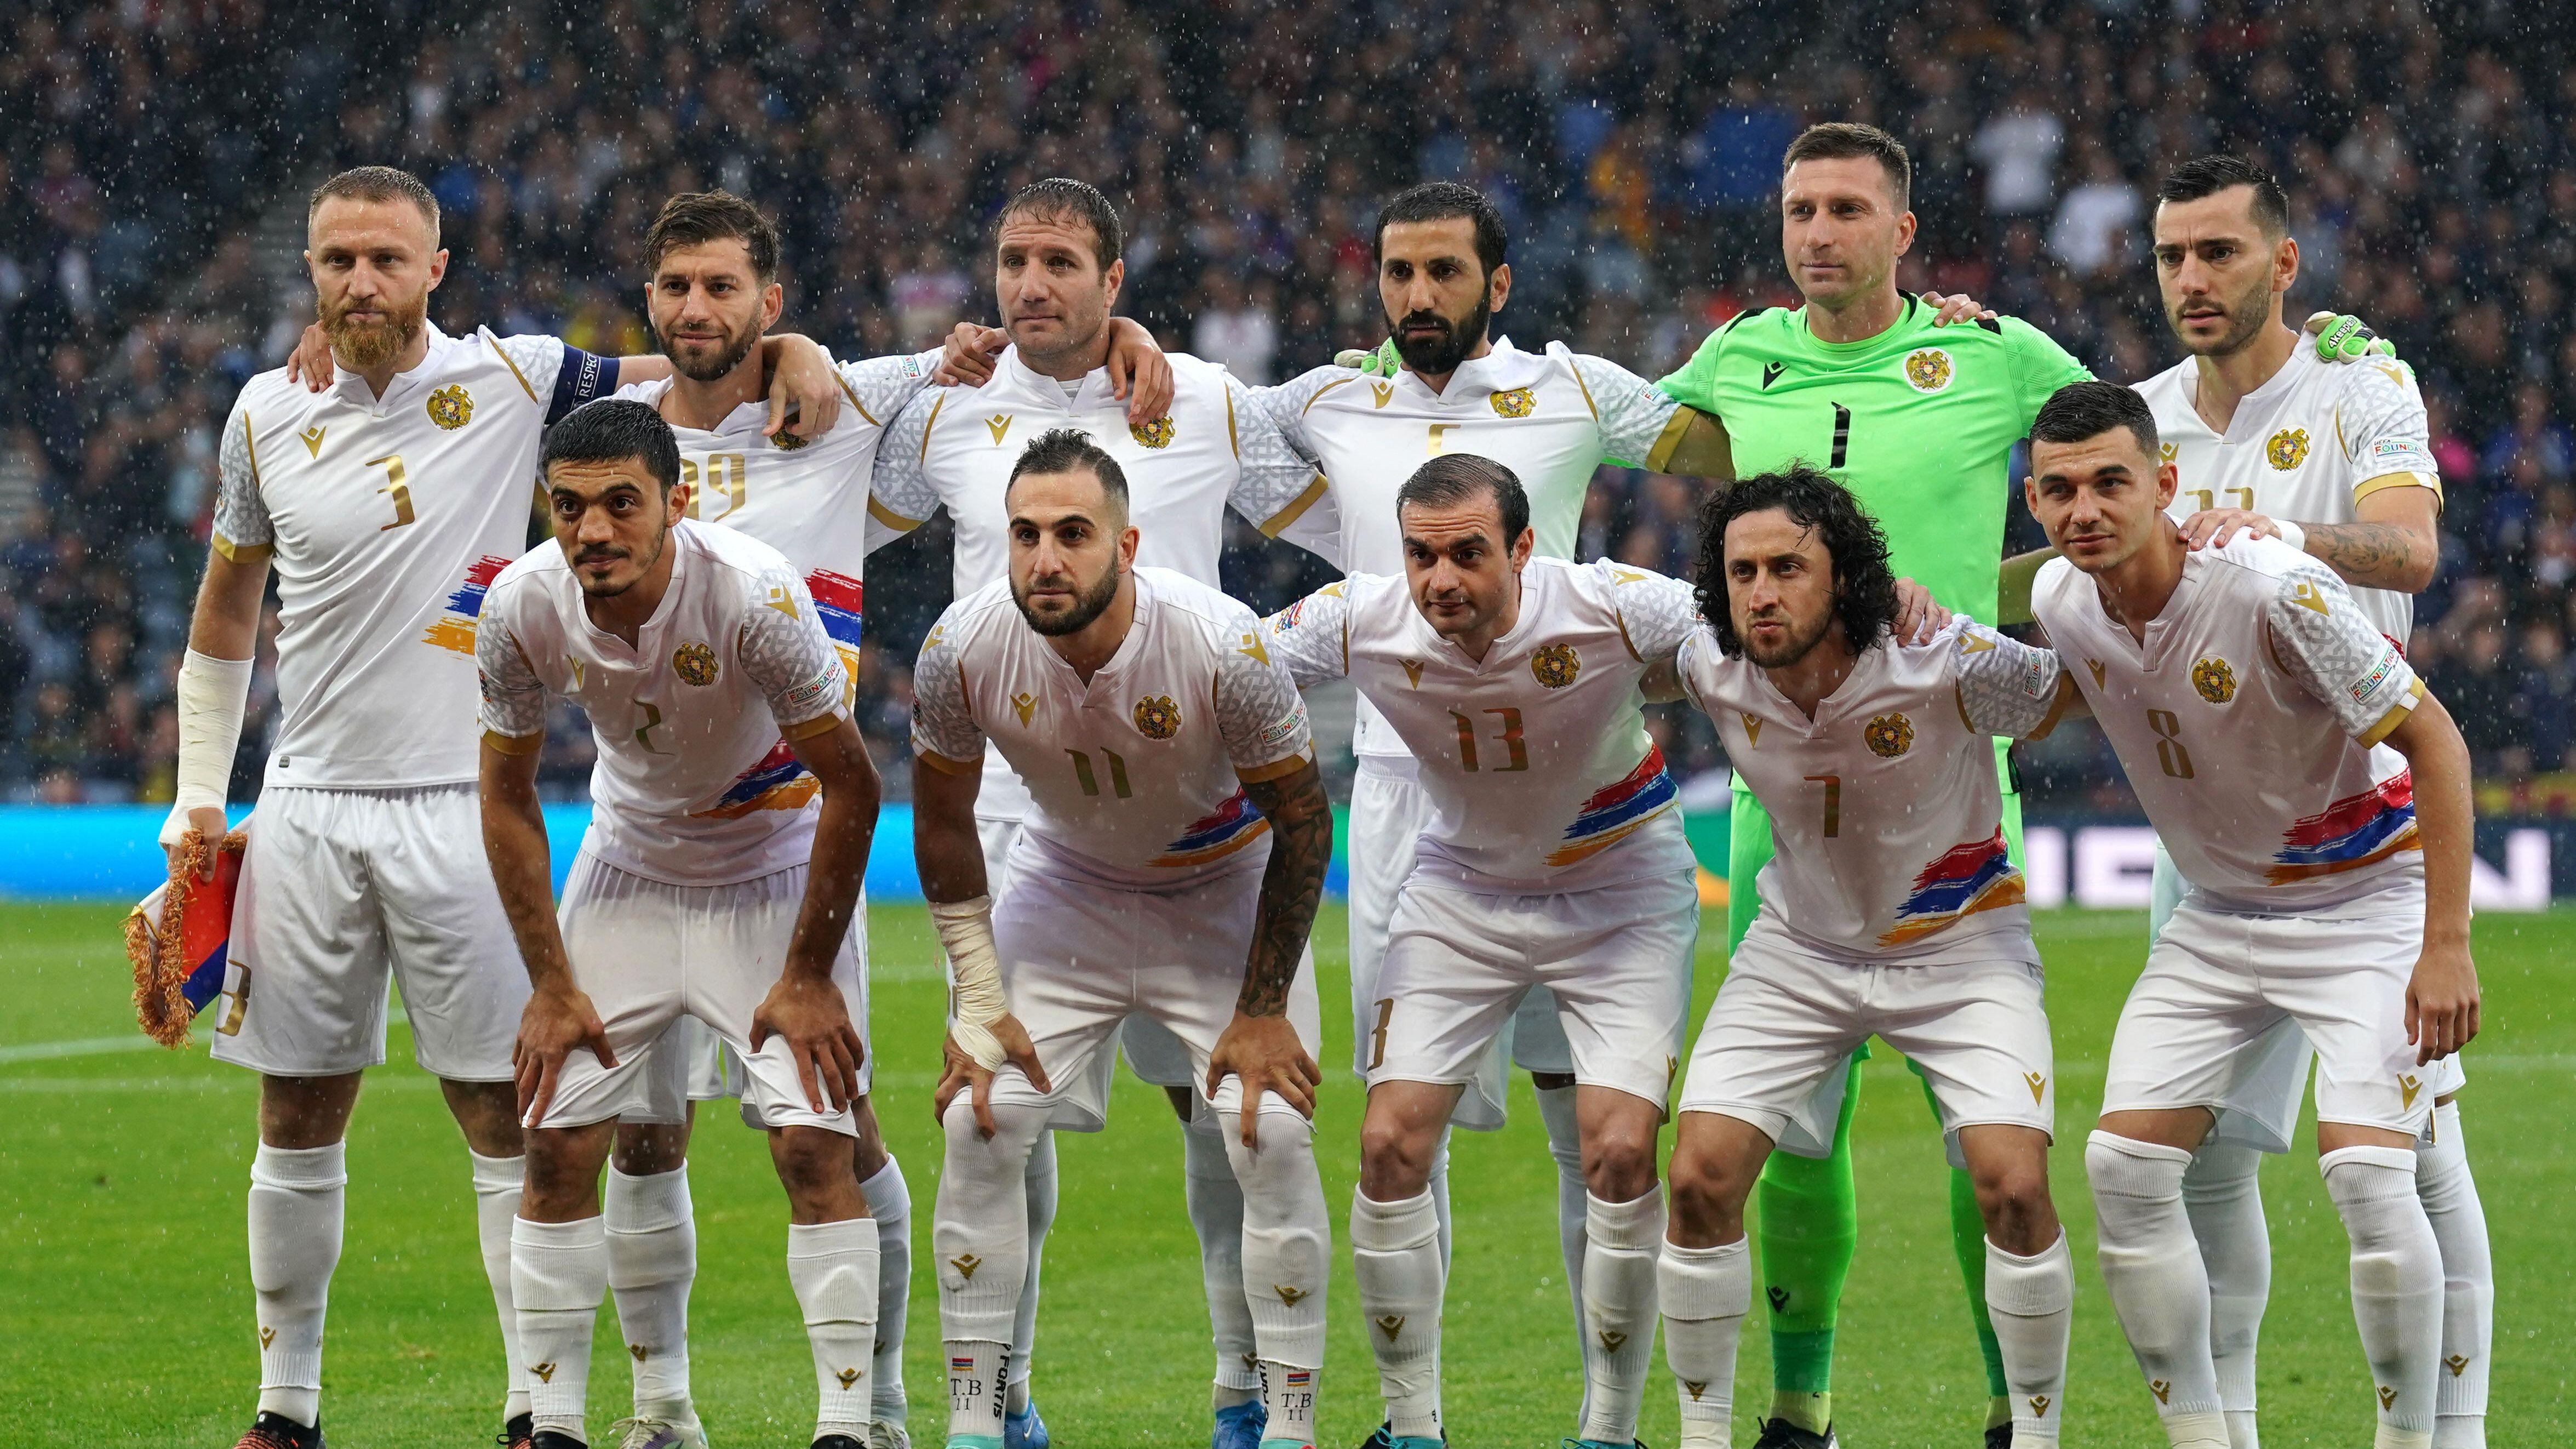 Armenia vow to put 'heart and soul' into beating Scotland.